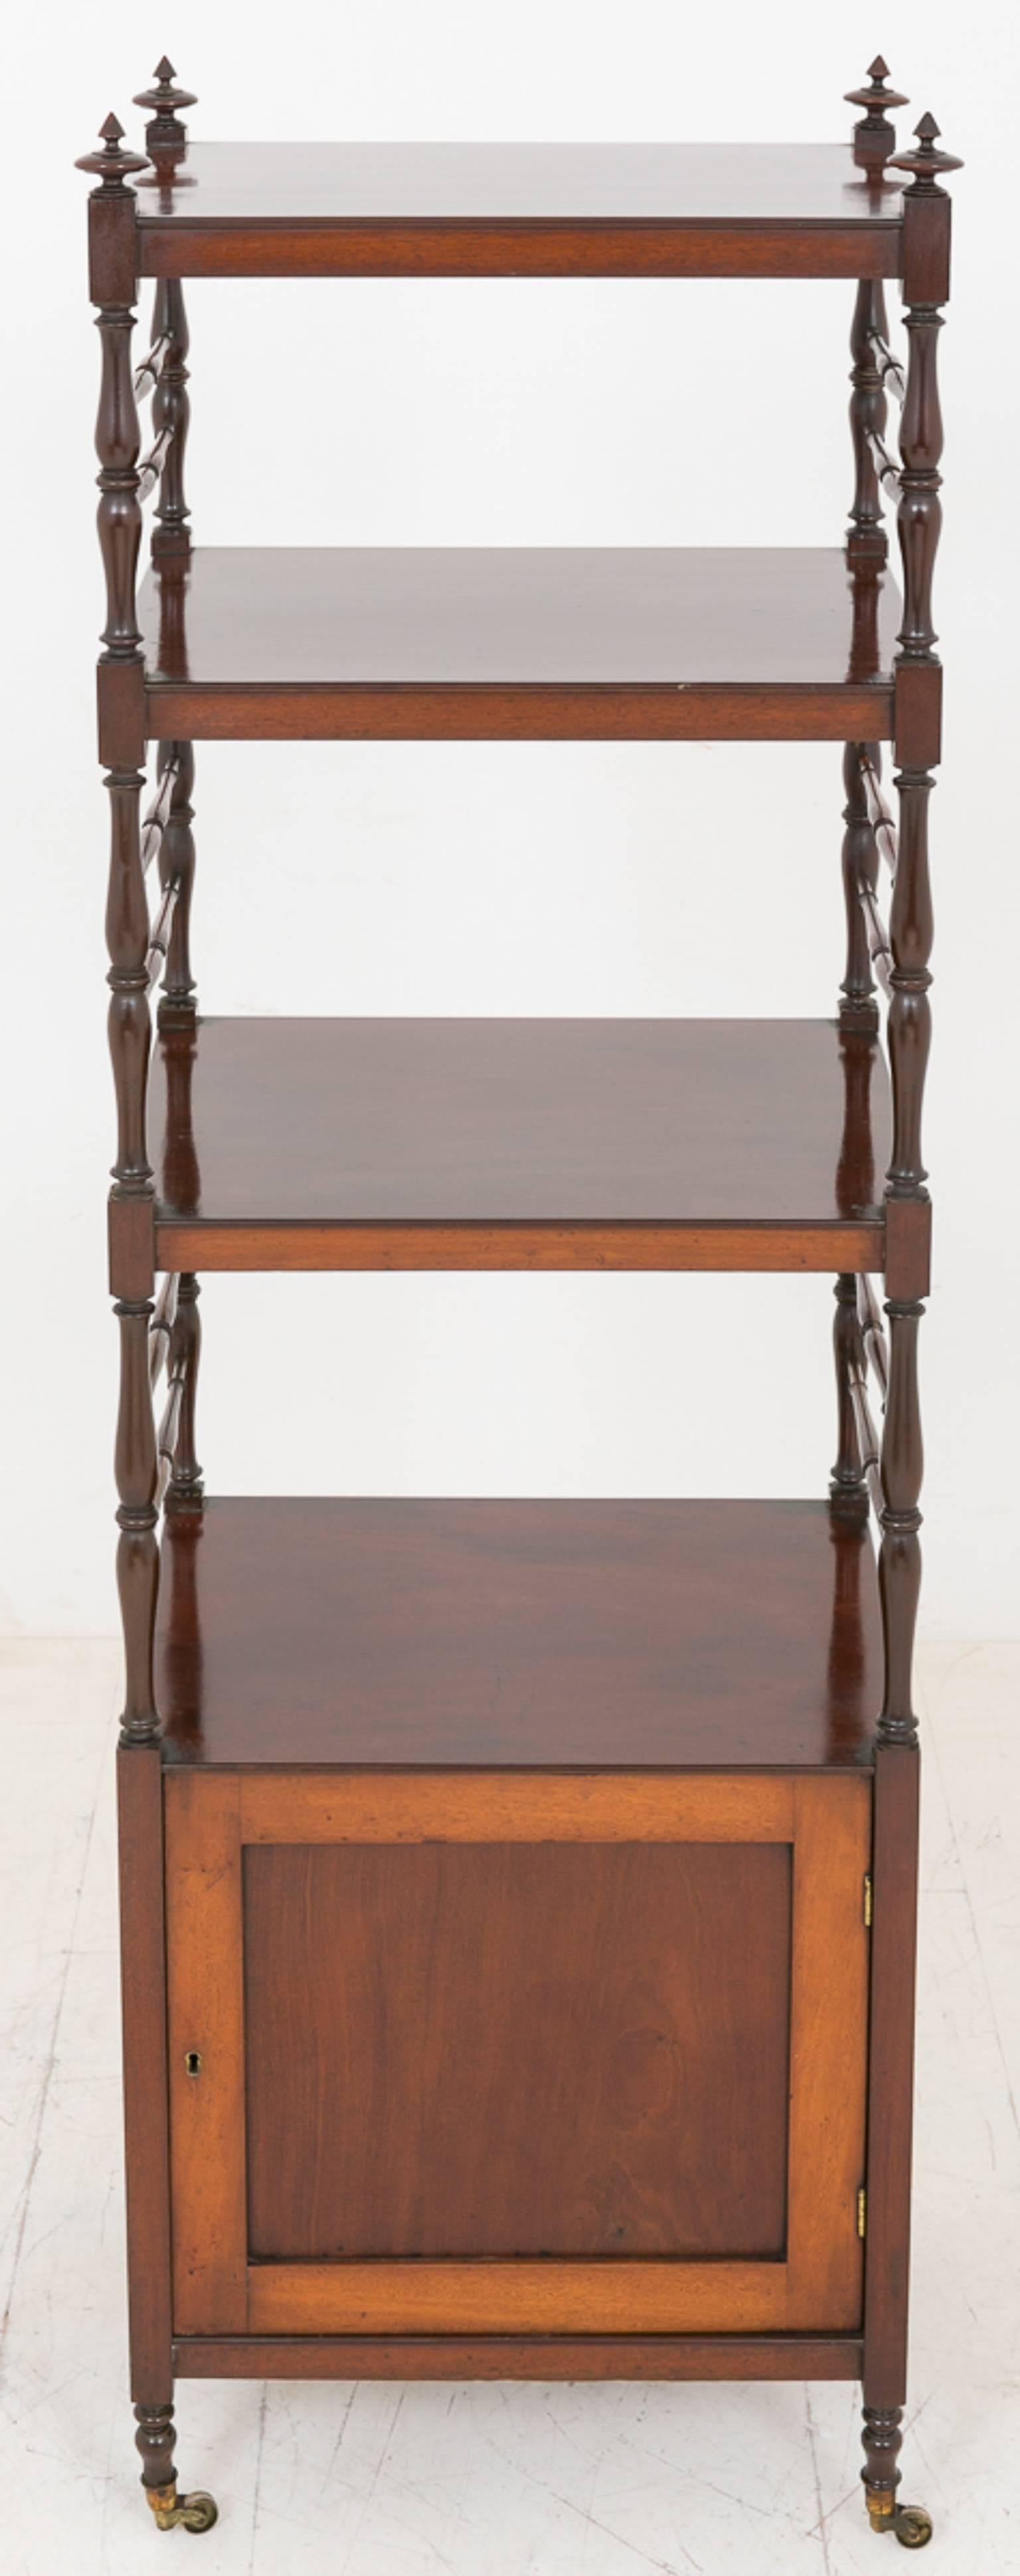 Mid-19th Century William IV Mahogany Whatnot For Sale